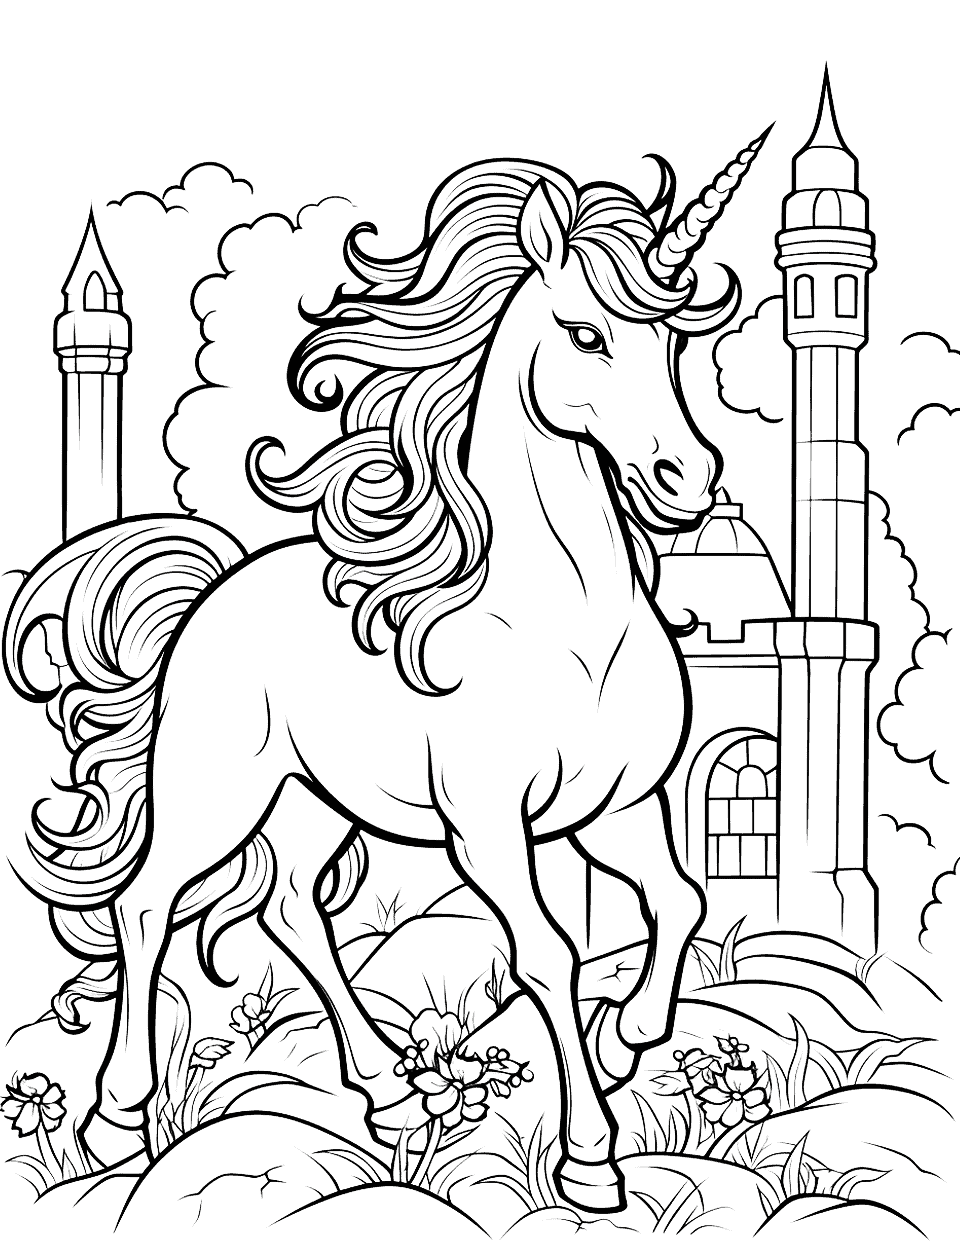 Unicorn and Ancient Ruins Coloring Page - An adventurous unicorn exploring ancient ruins with pillars and vines.